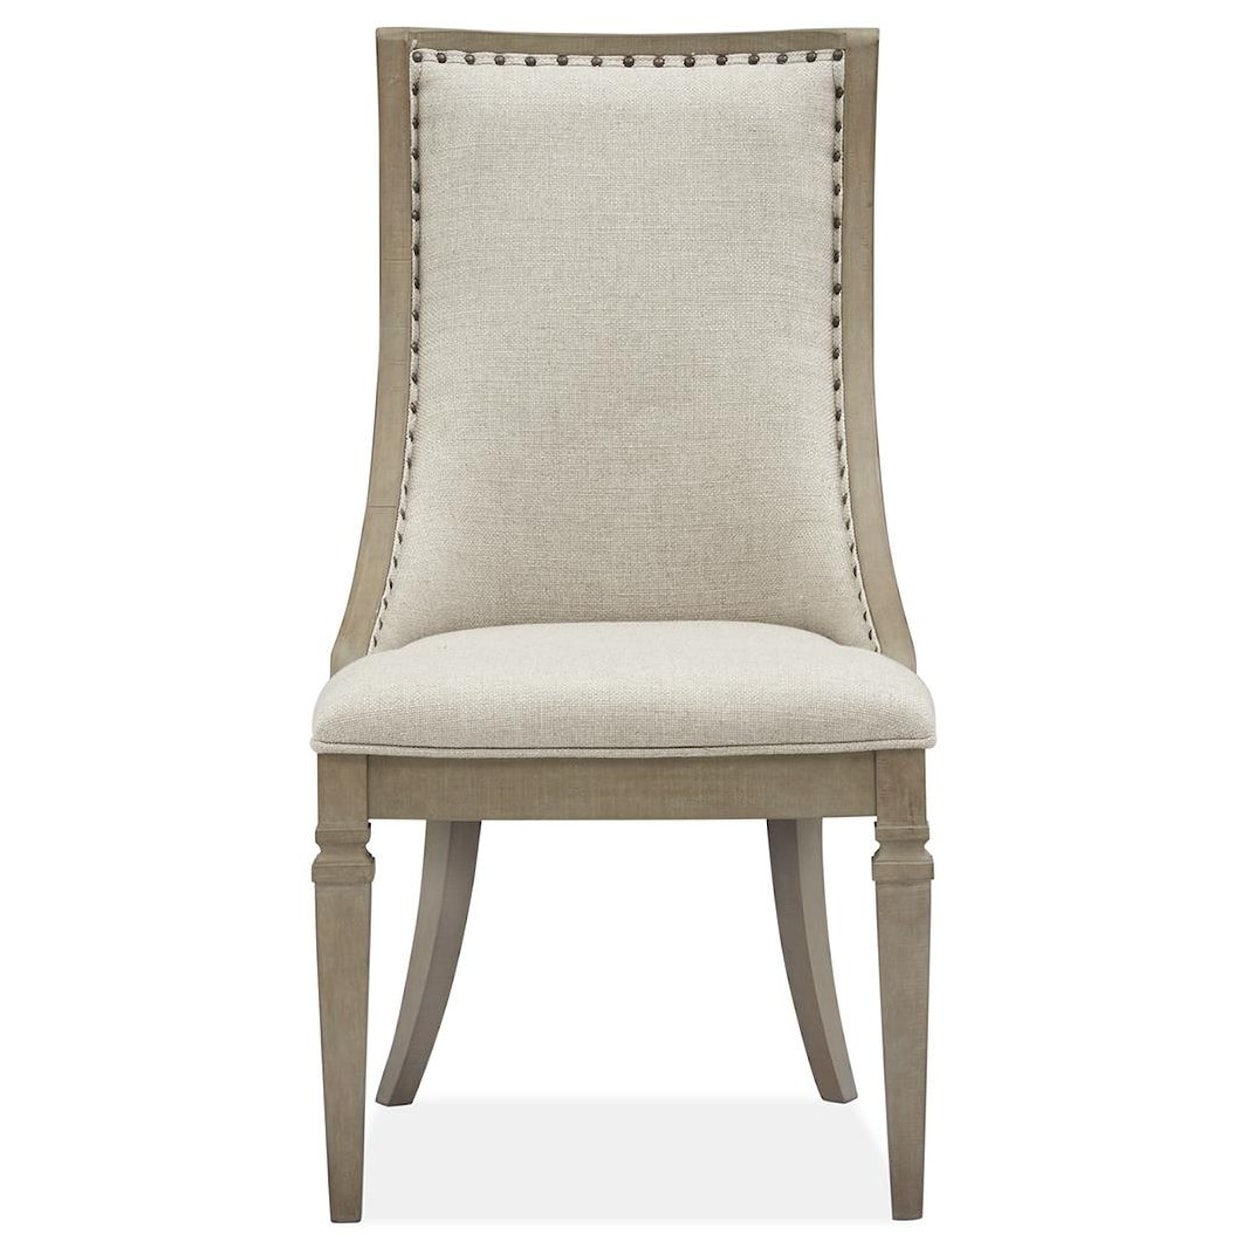 Magnussen Home Lancaster Dining Arm Chair